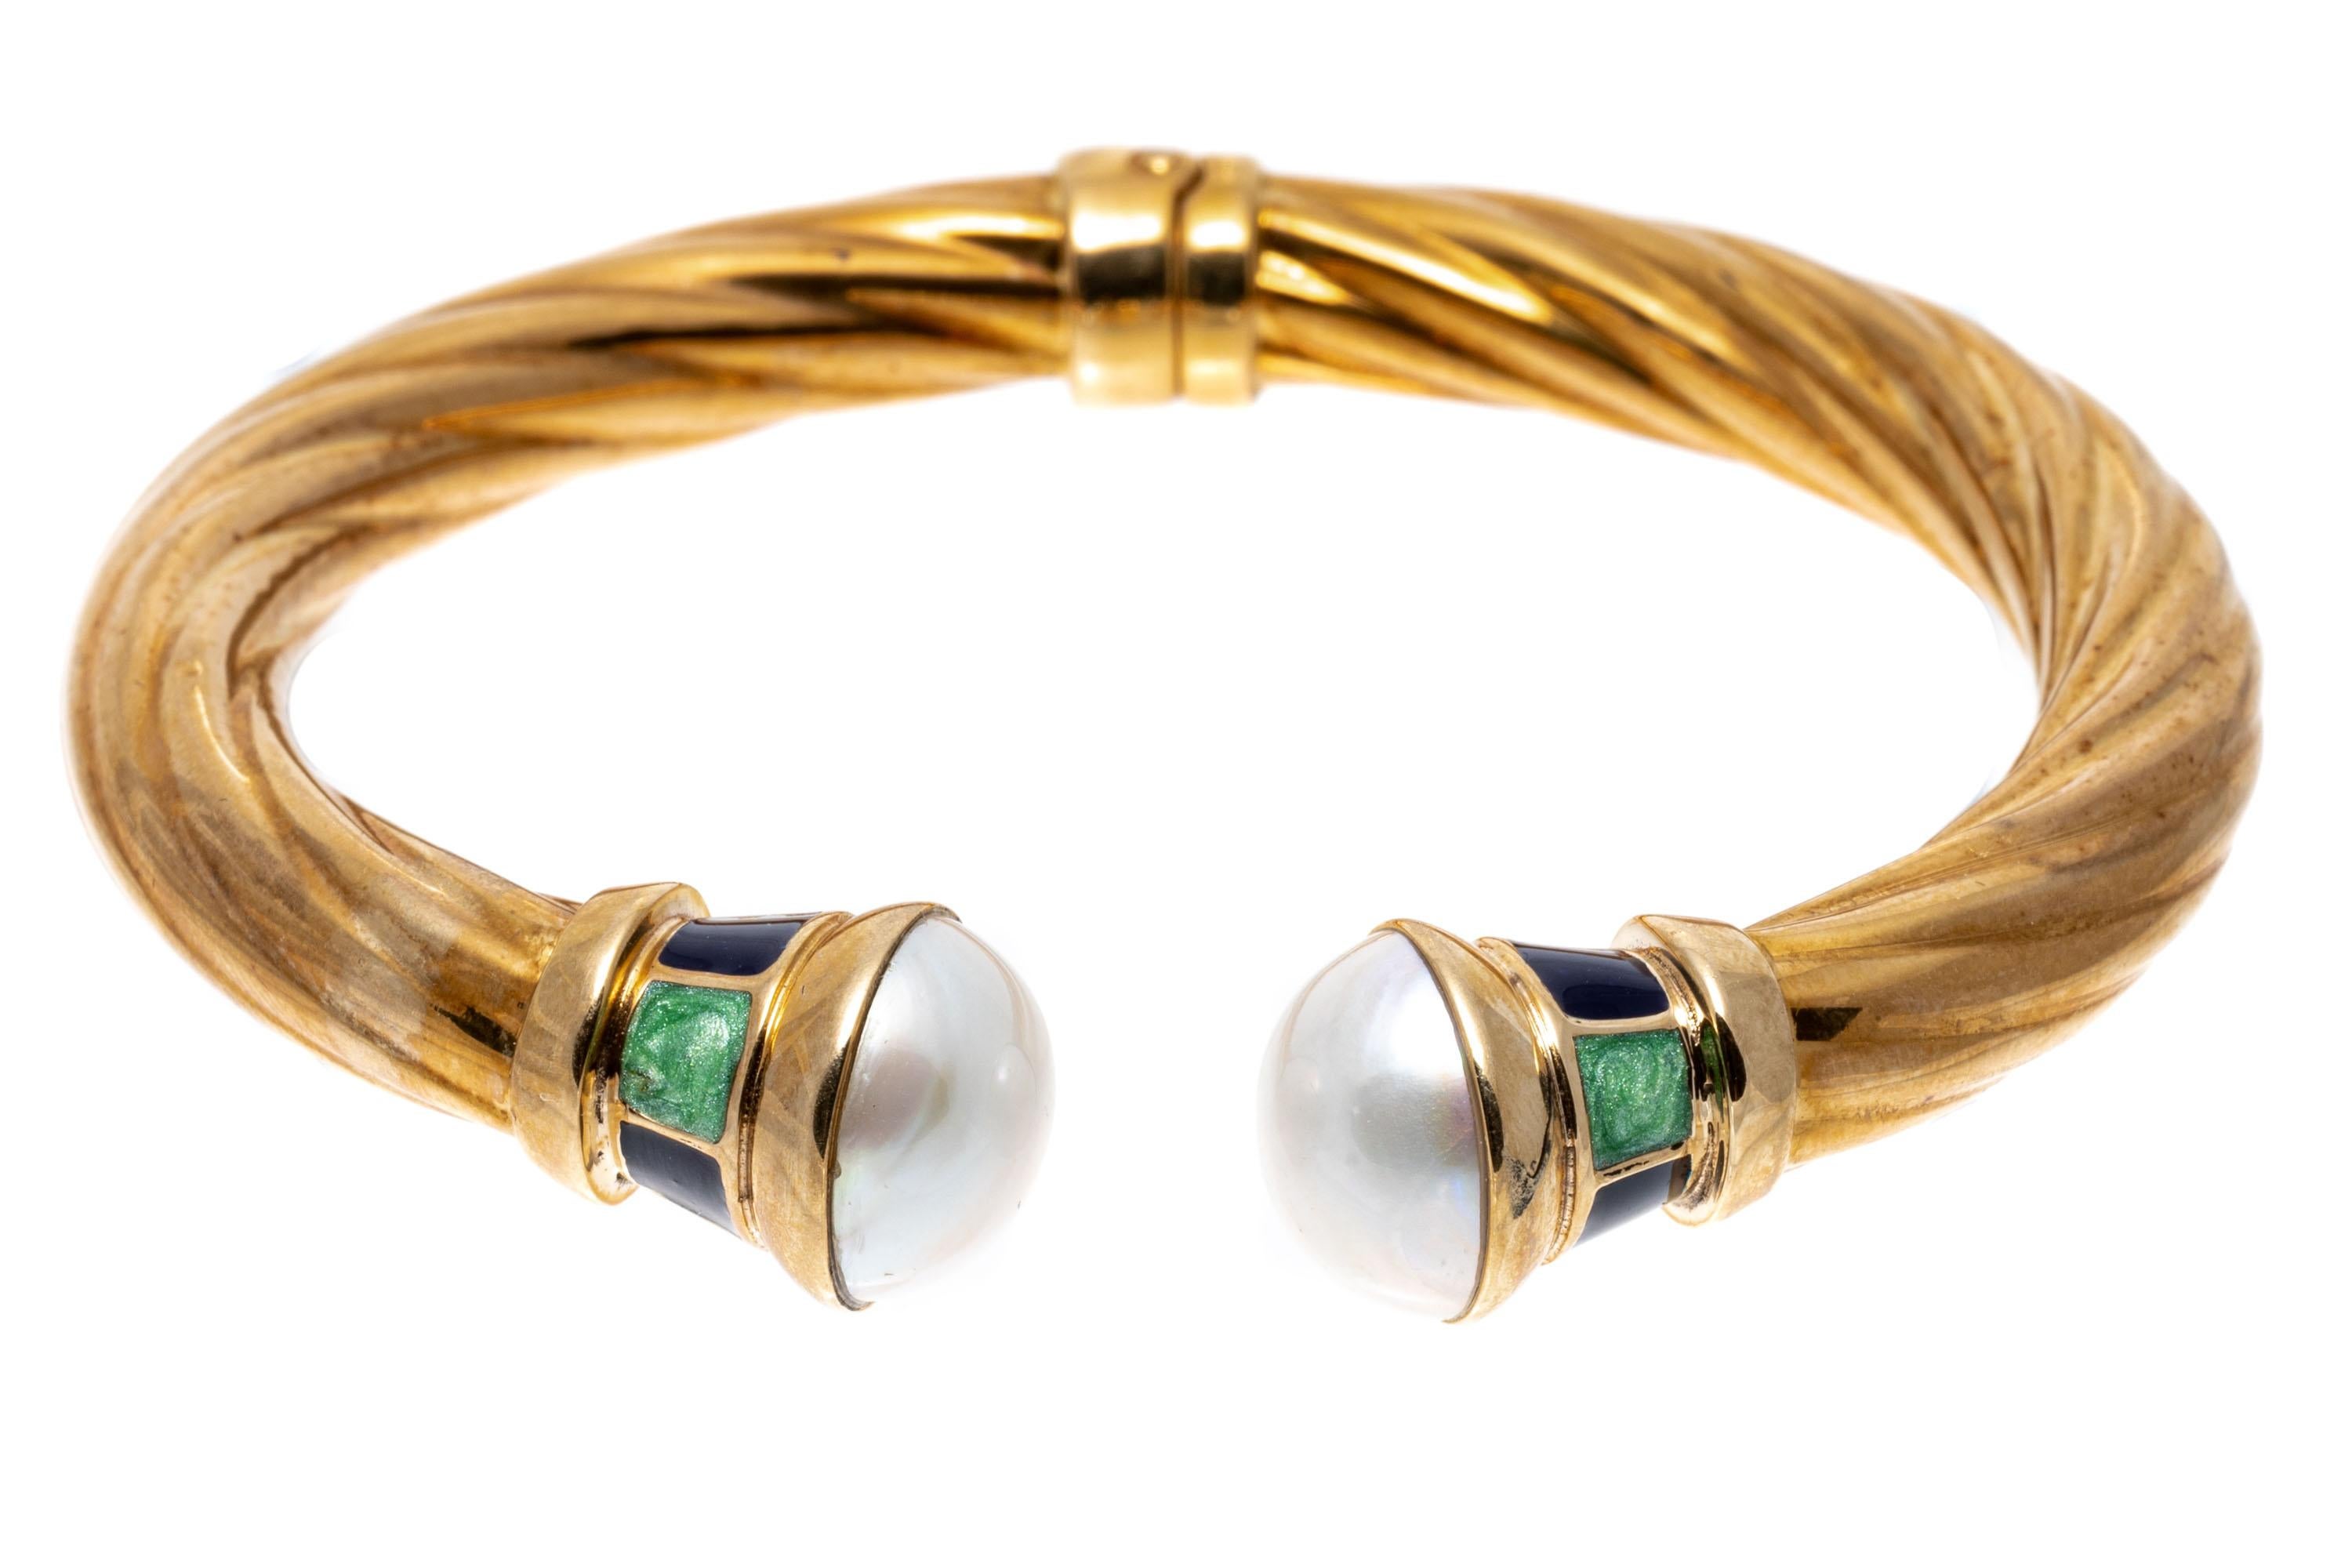 14k Yellow Gold Ribbed Open Cuff Bangle Bracelet Set With Mabe Pearls And Green And Blue Enamel.
This colorful bracelet is a hinged, open ribbed cuff style bangle, with cultured mabe pearl ends, decorated with collars of alternating pale green and